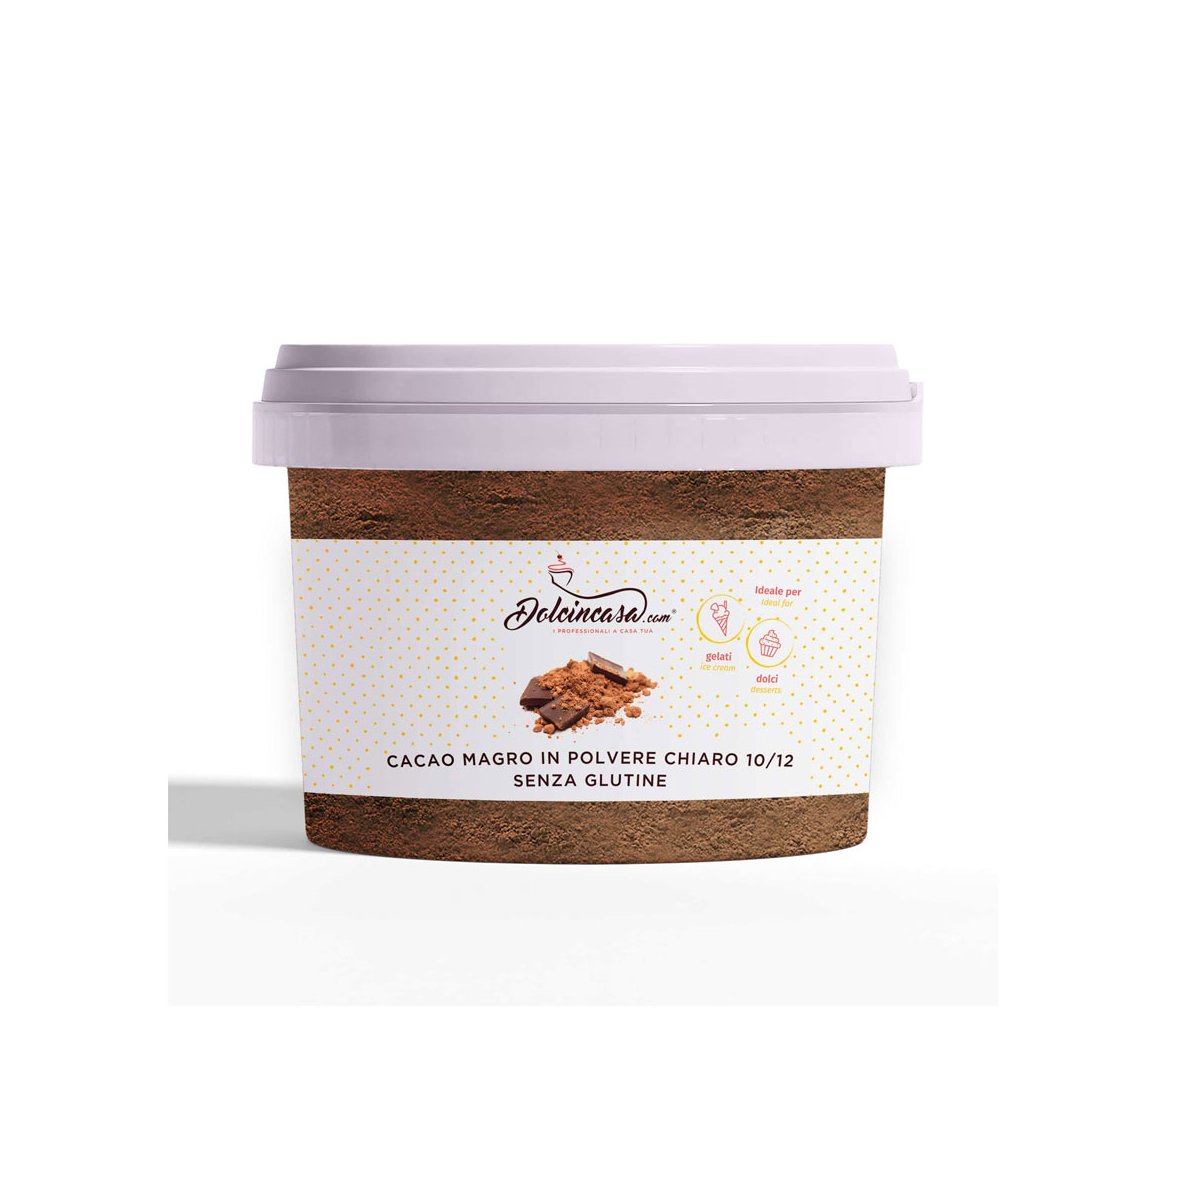 Cacao Magro in Polvere 10/12 – 250g